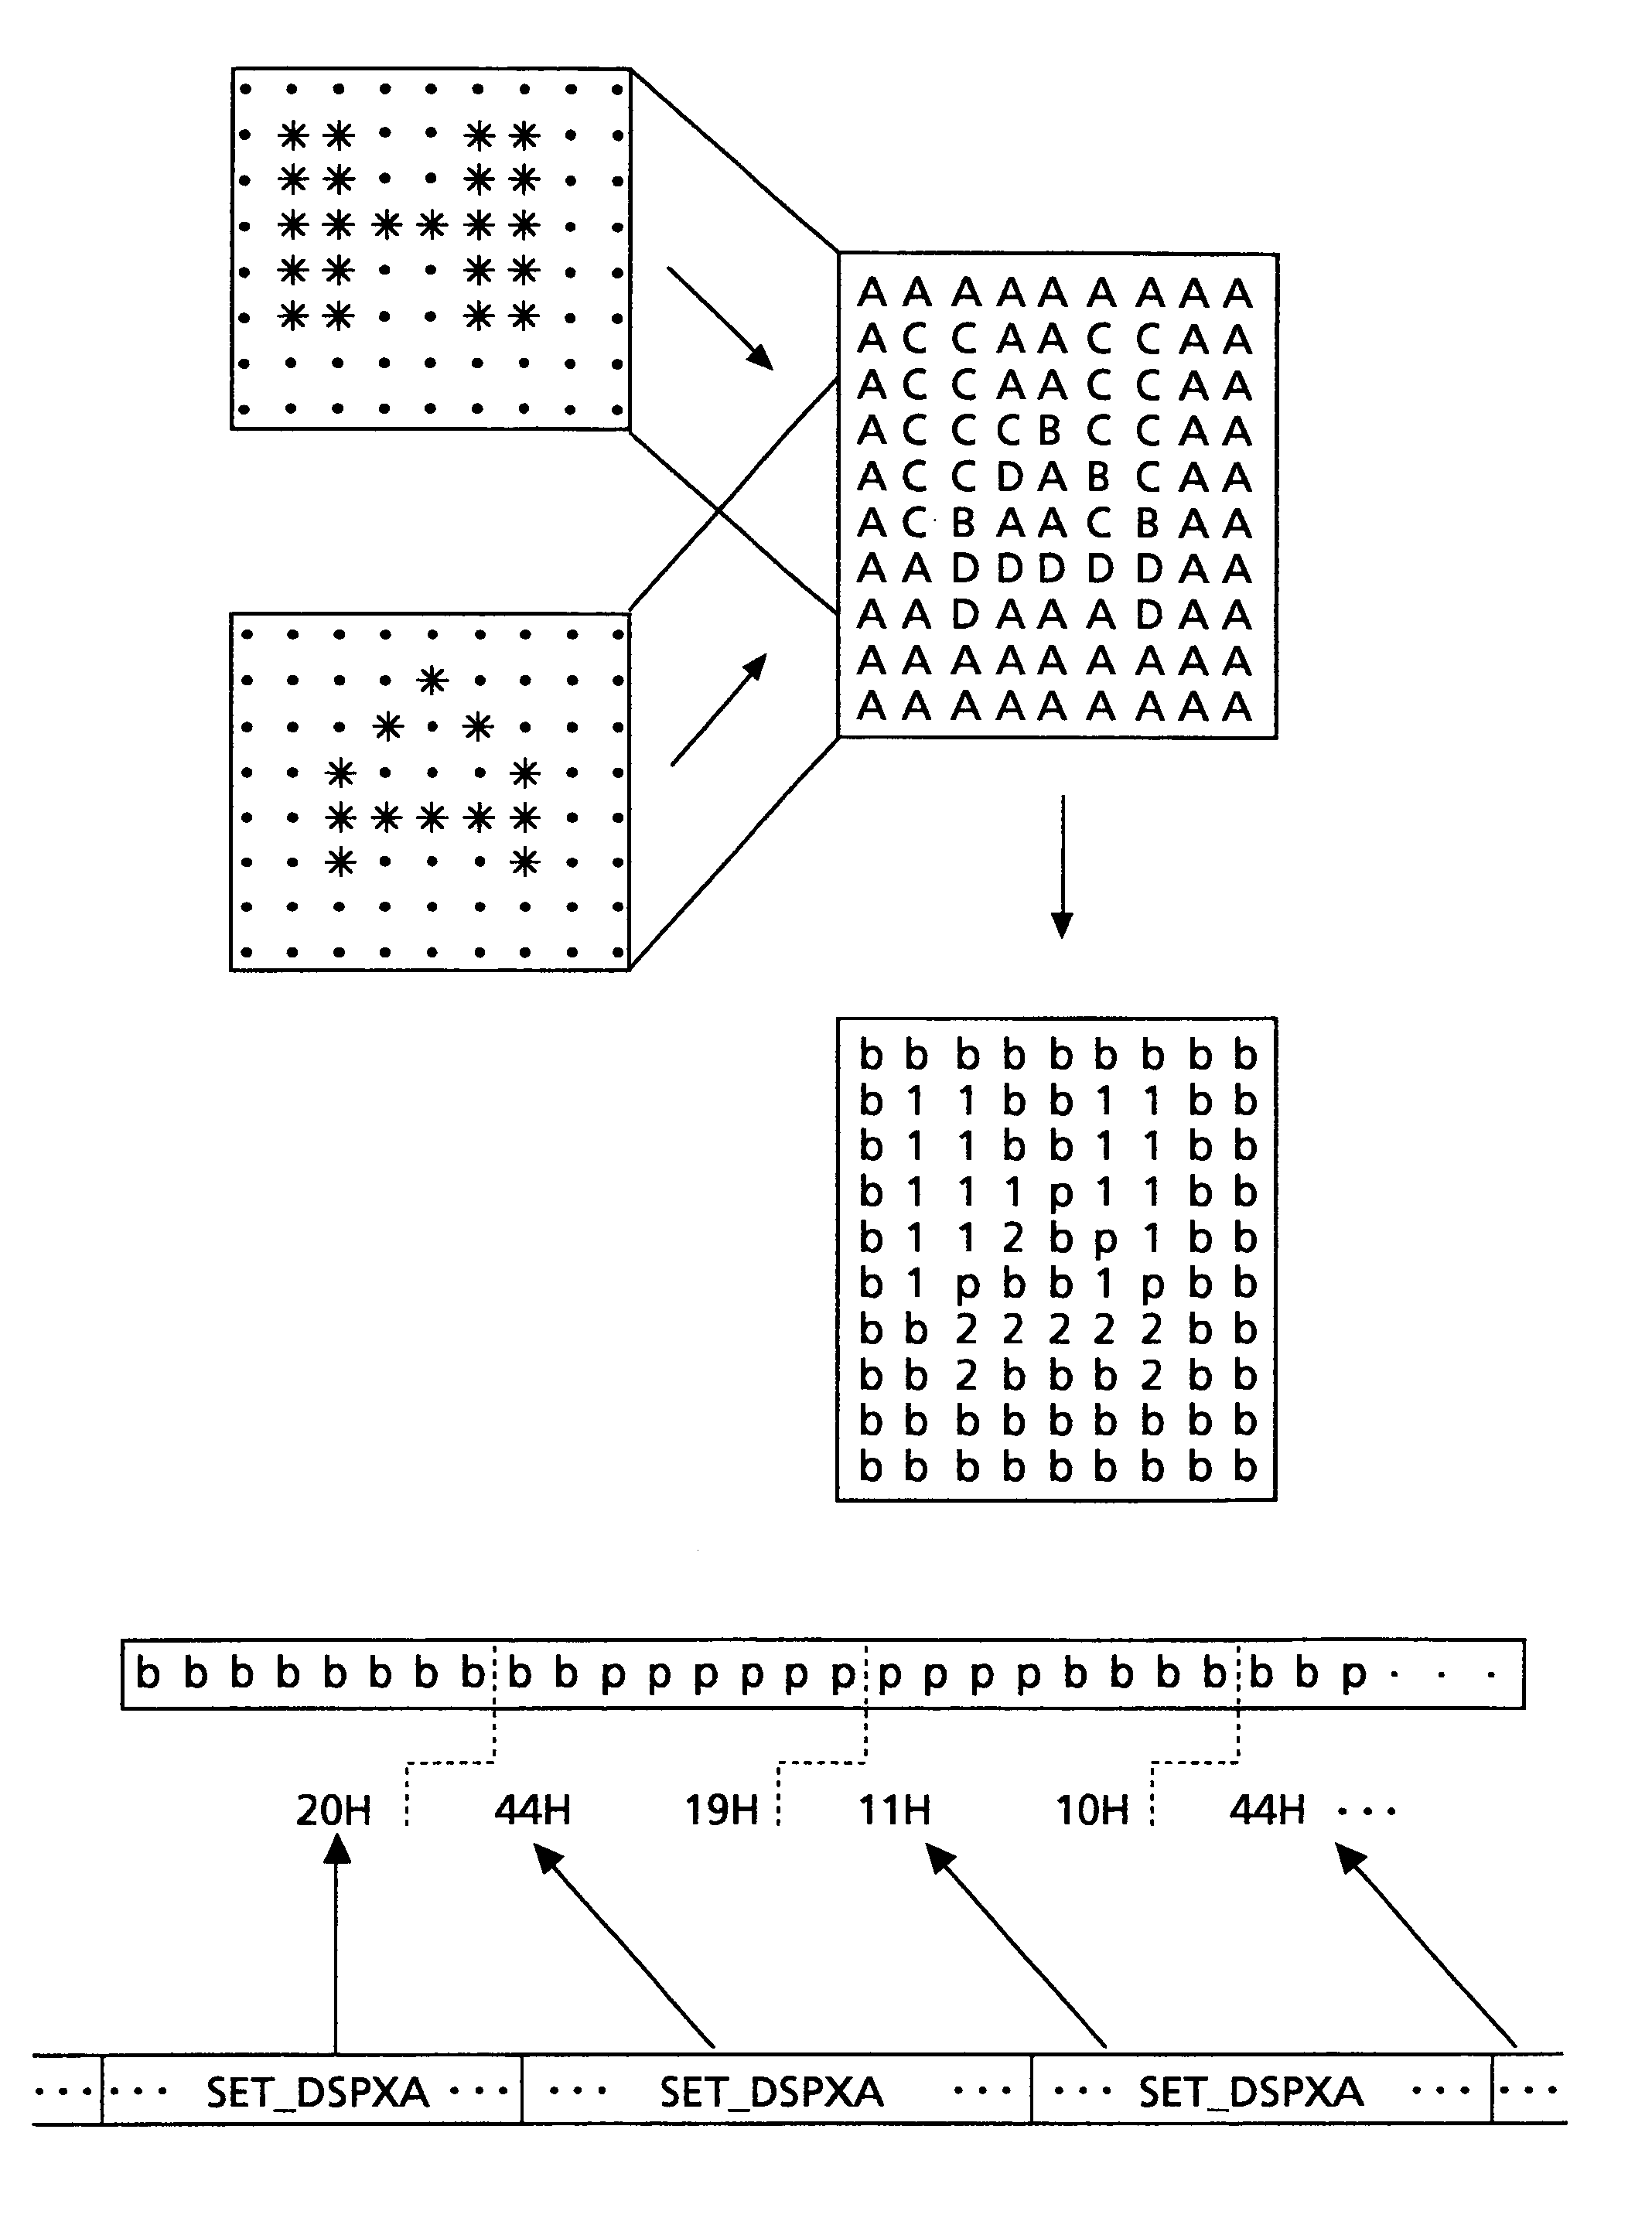 Coding method for picture sequence or sub-picture unit